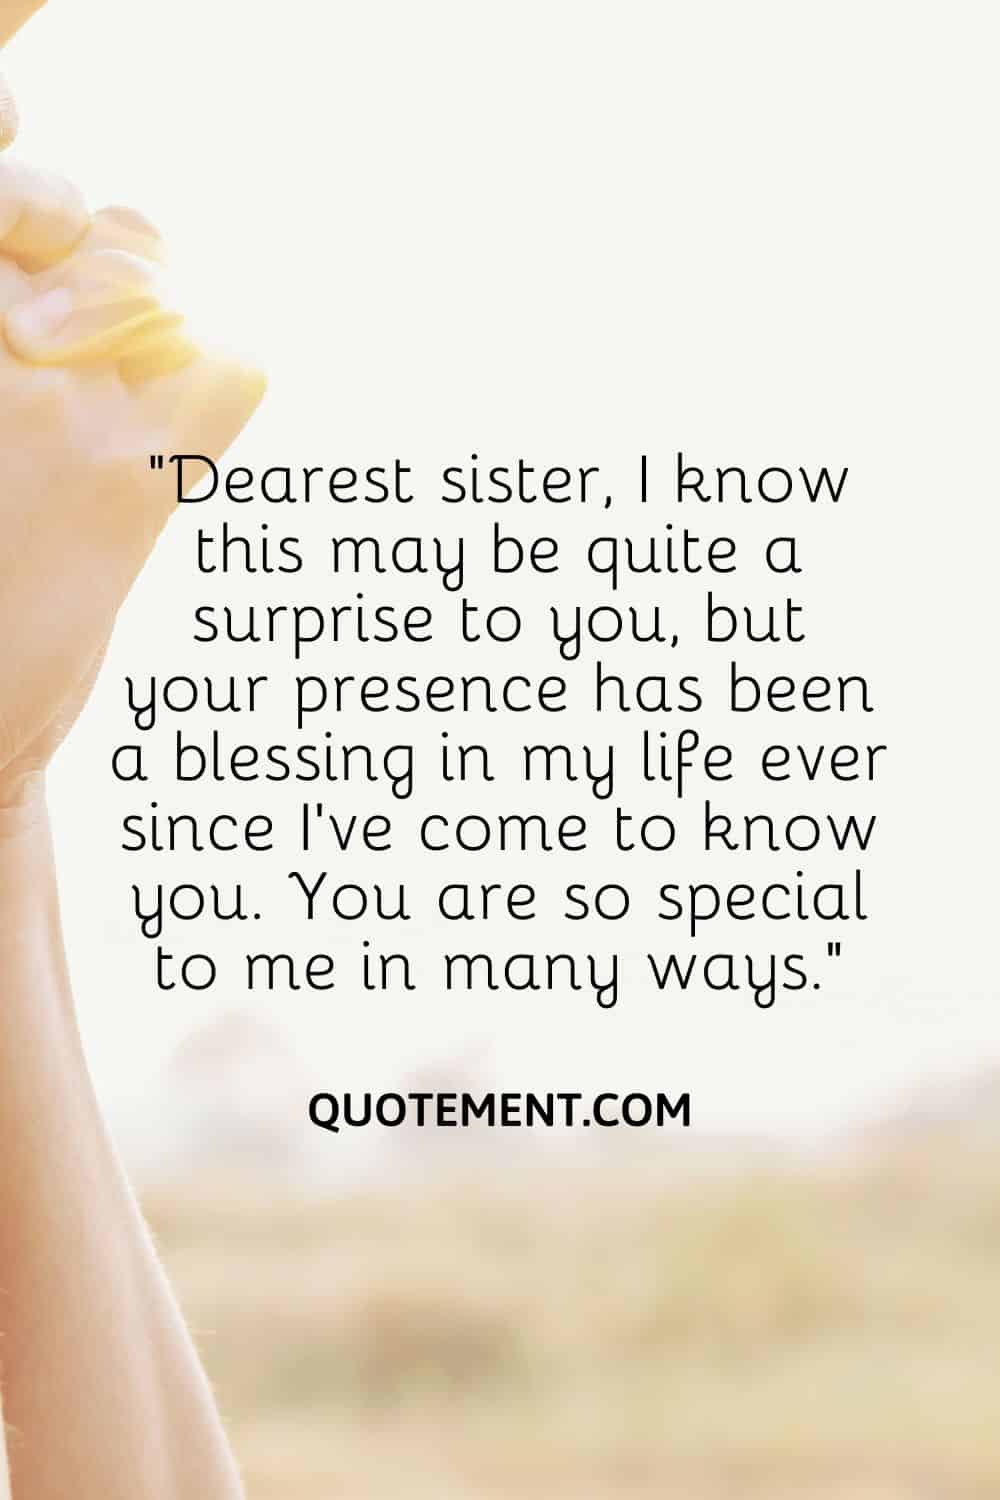 “Dearest sister, I know this may be quite a surprise to you, but your presence has been a blessing in my life ever since I’ve come to know you.